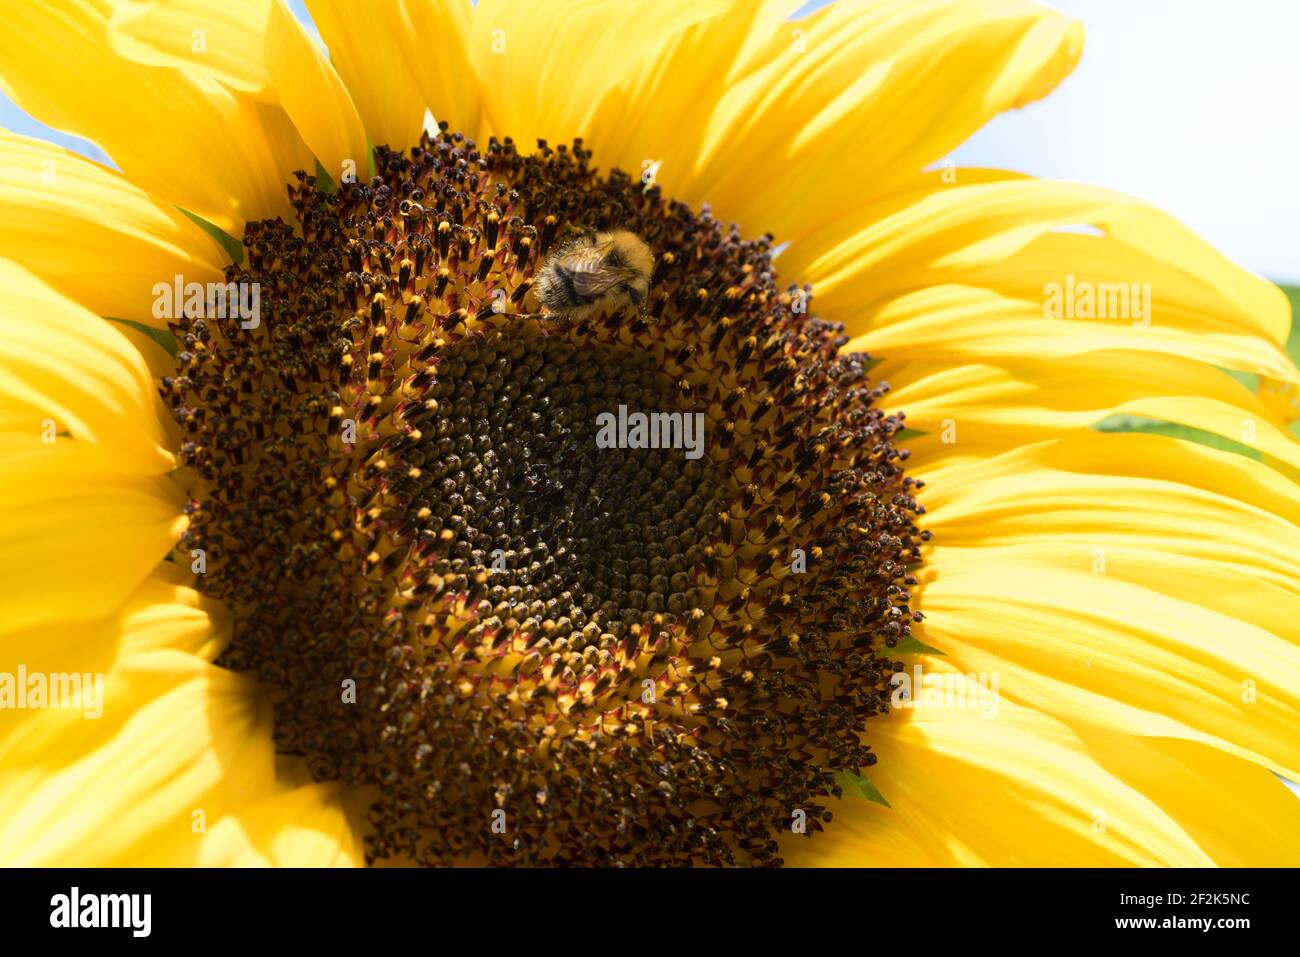 Common carder bee (Bombus pascuorum) on a sunflower (helianthus) in a garden in Exeter, Devon, UK. Stock Photo